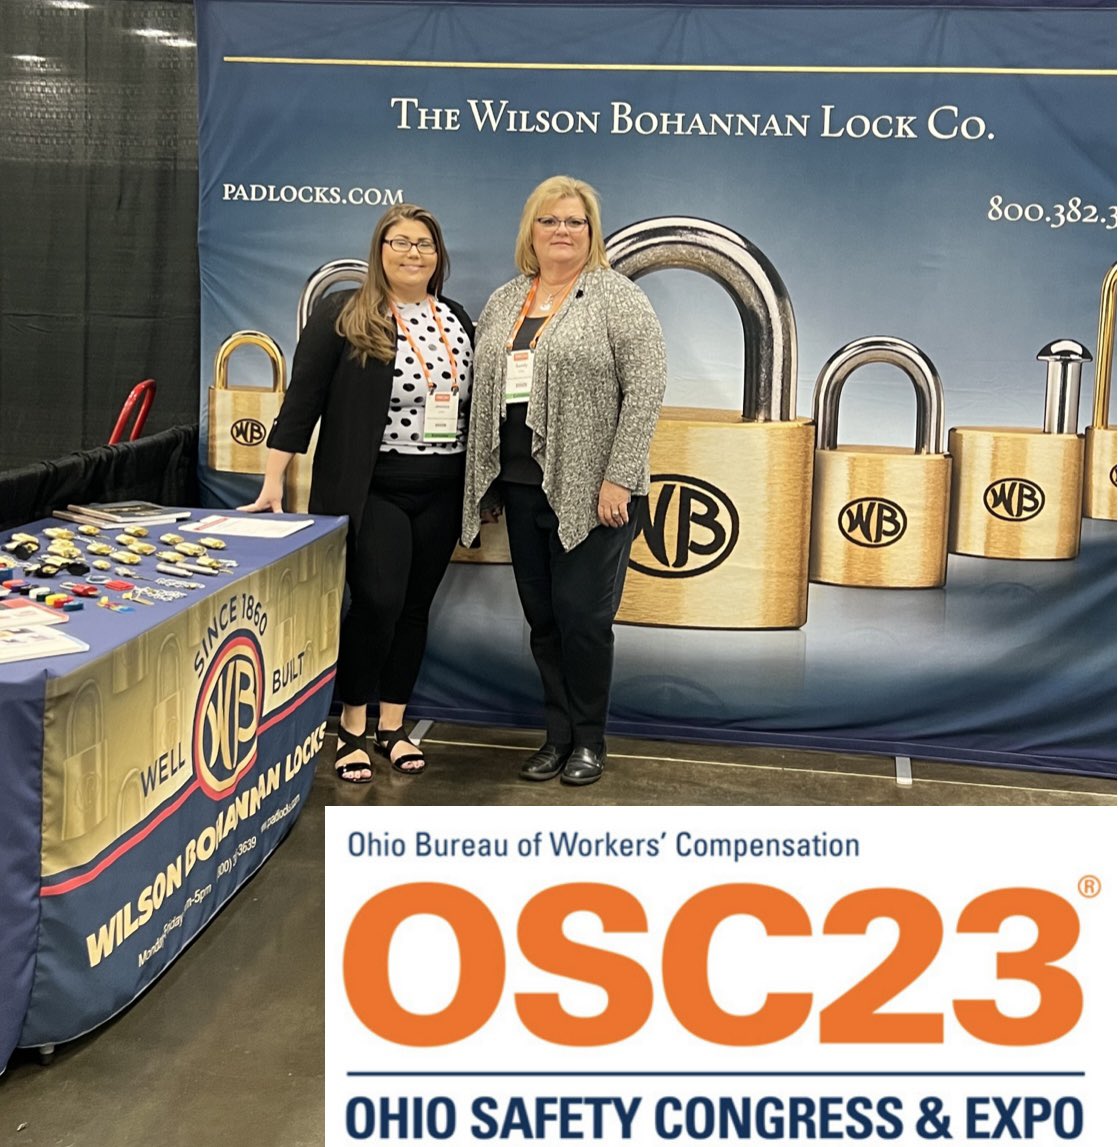 We are having great conversations at the @OhioBWC Ohio Safety Congress and Expo. Booth 1121. Sandy and Jessica are available to talk lockout tagout and other helpful padlock security needs. #ohiosafetycongressandexpo #lockouttagout #padlocks #wilsonbohannan